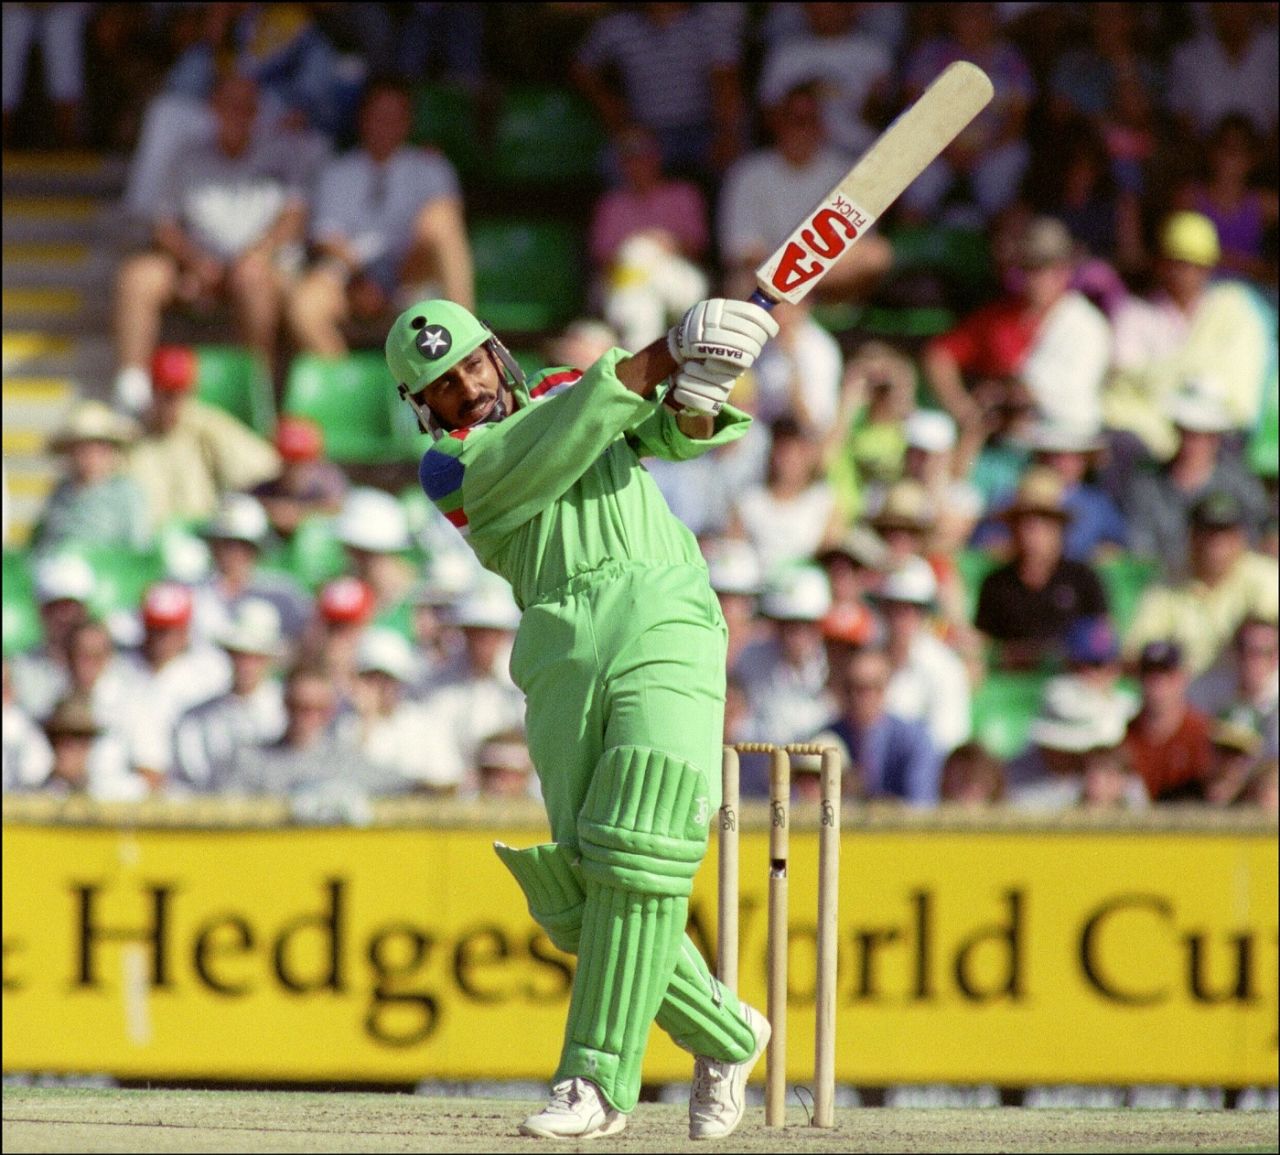 Rameez Raja steps out to hit over the top, World Cup 1992